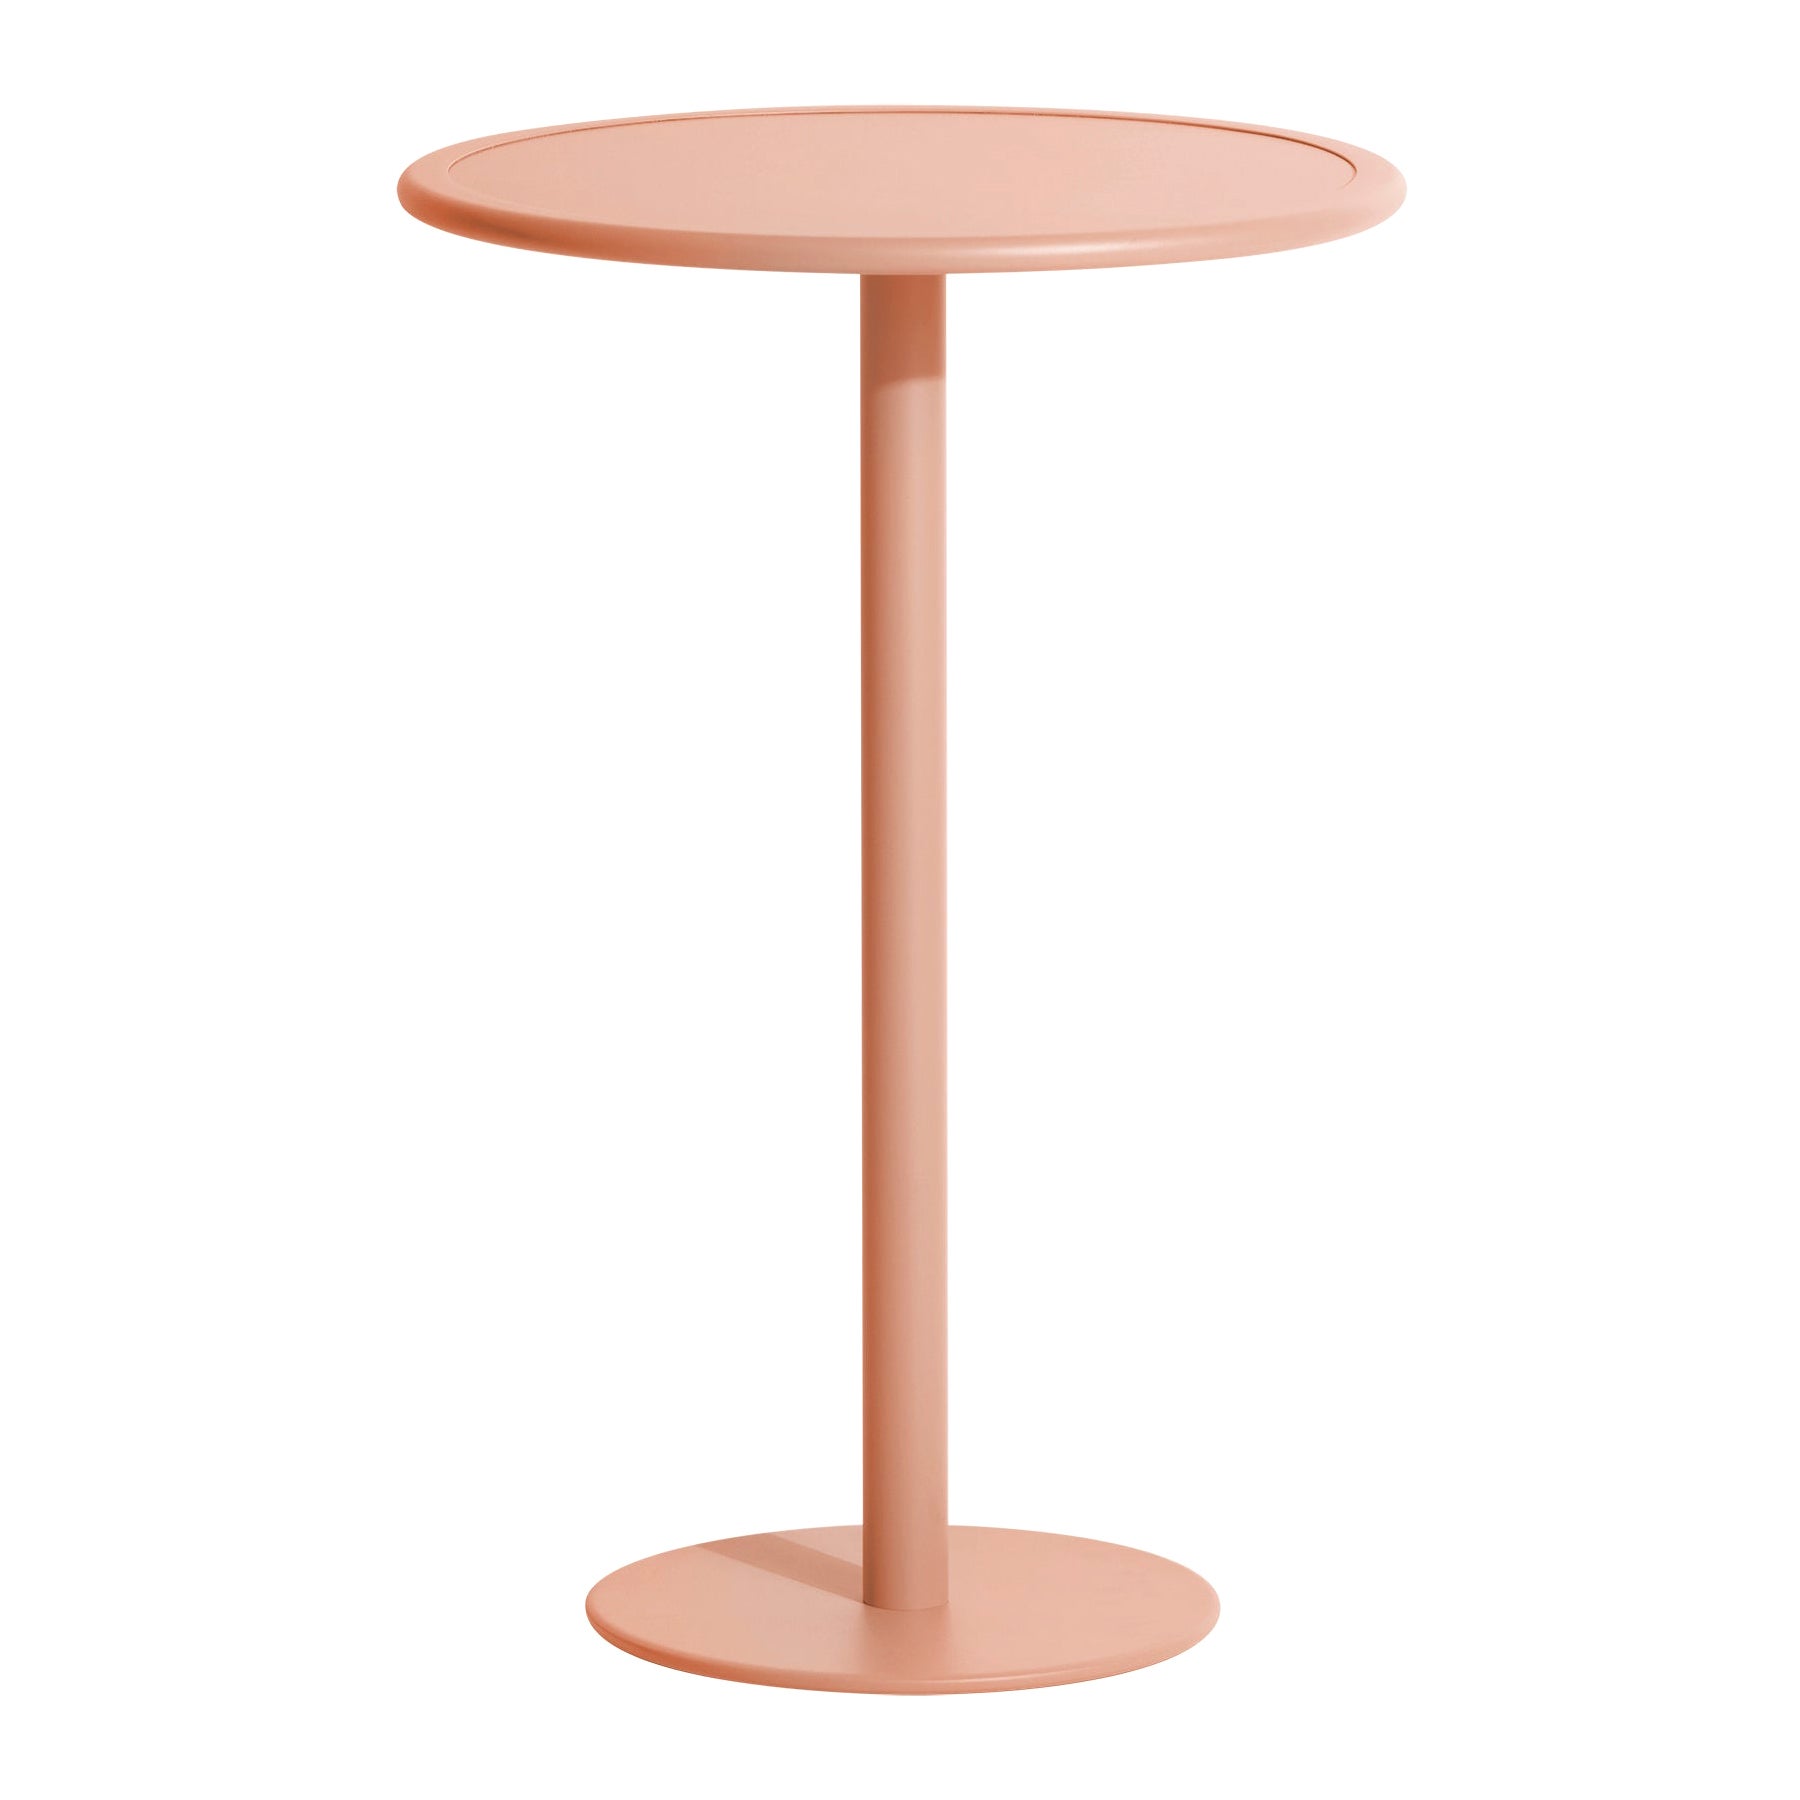 Petite Friture Week-End Round High Table in Blush Aluminium, 2017 For Sale